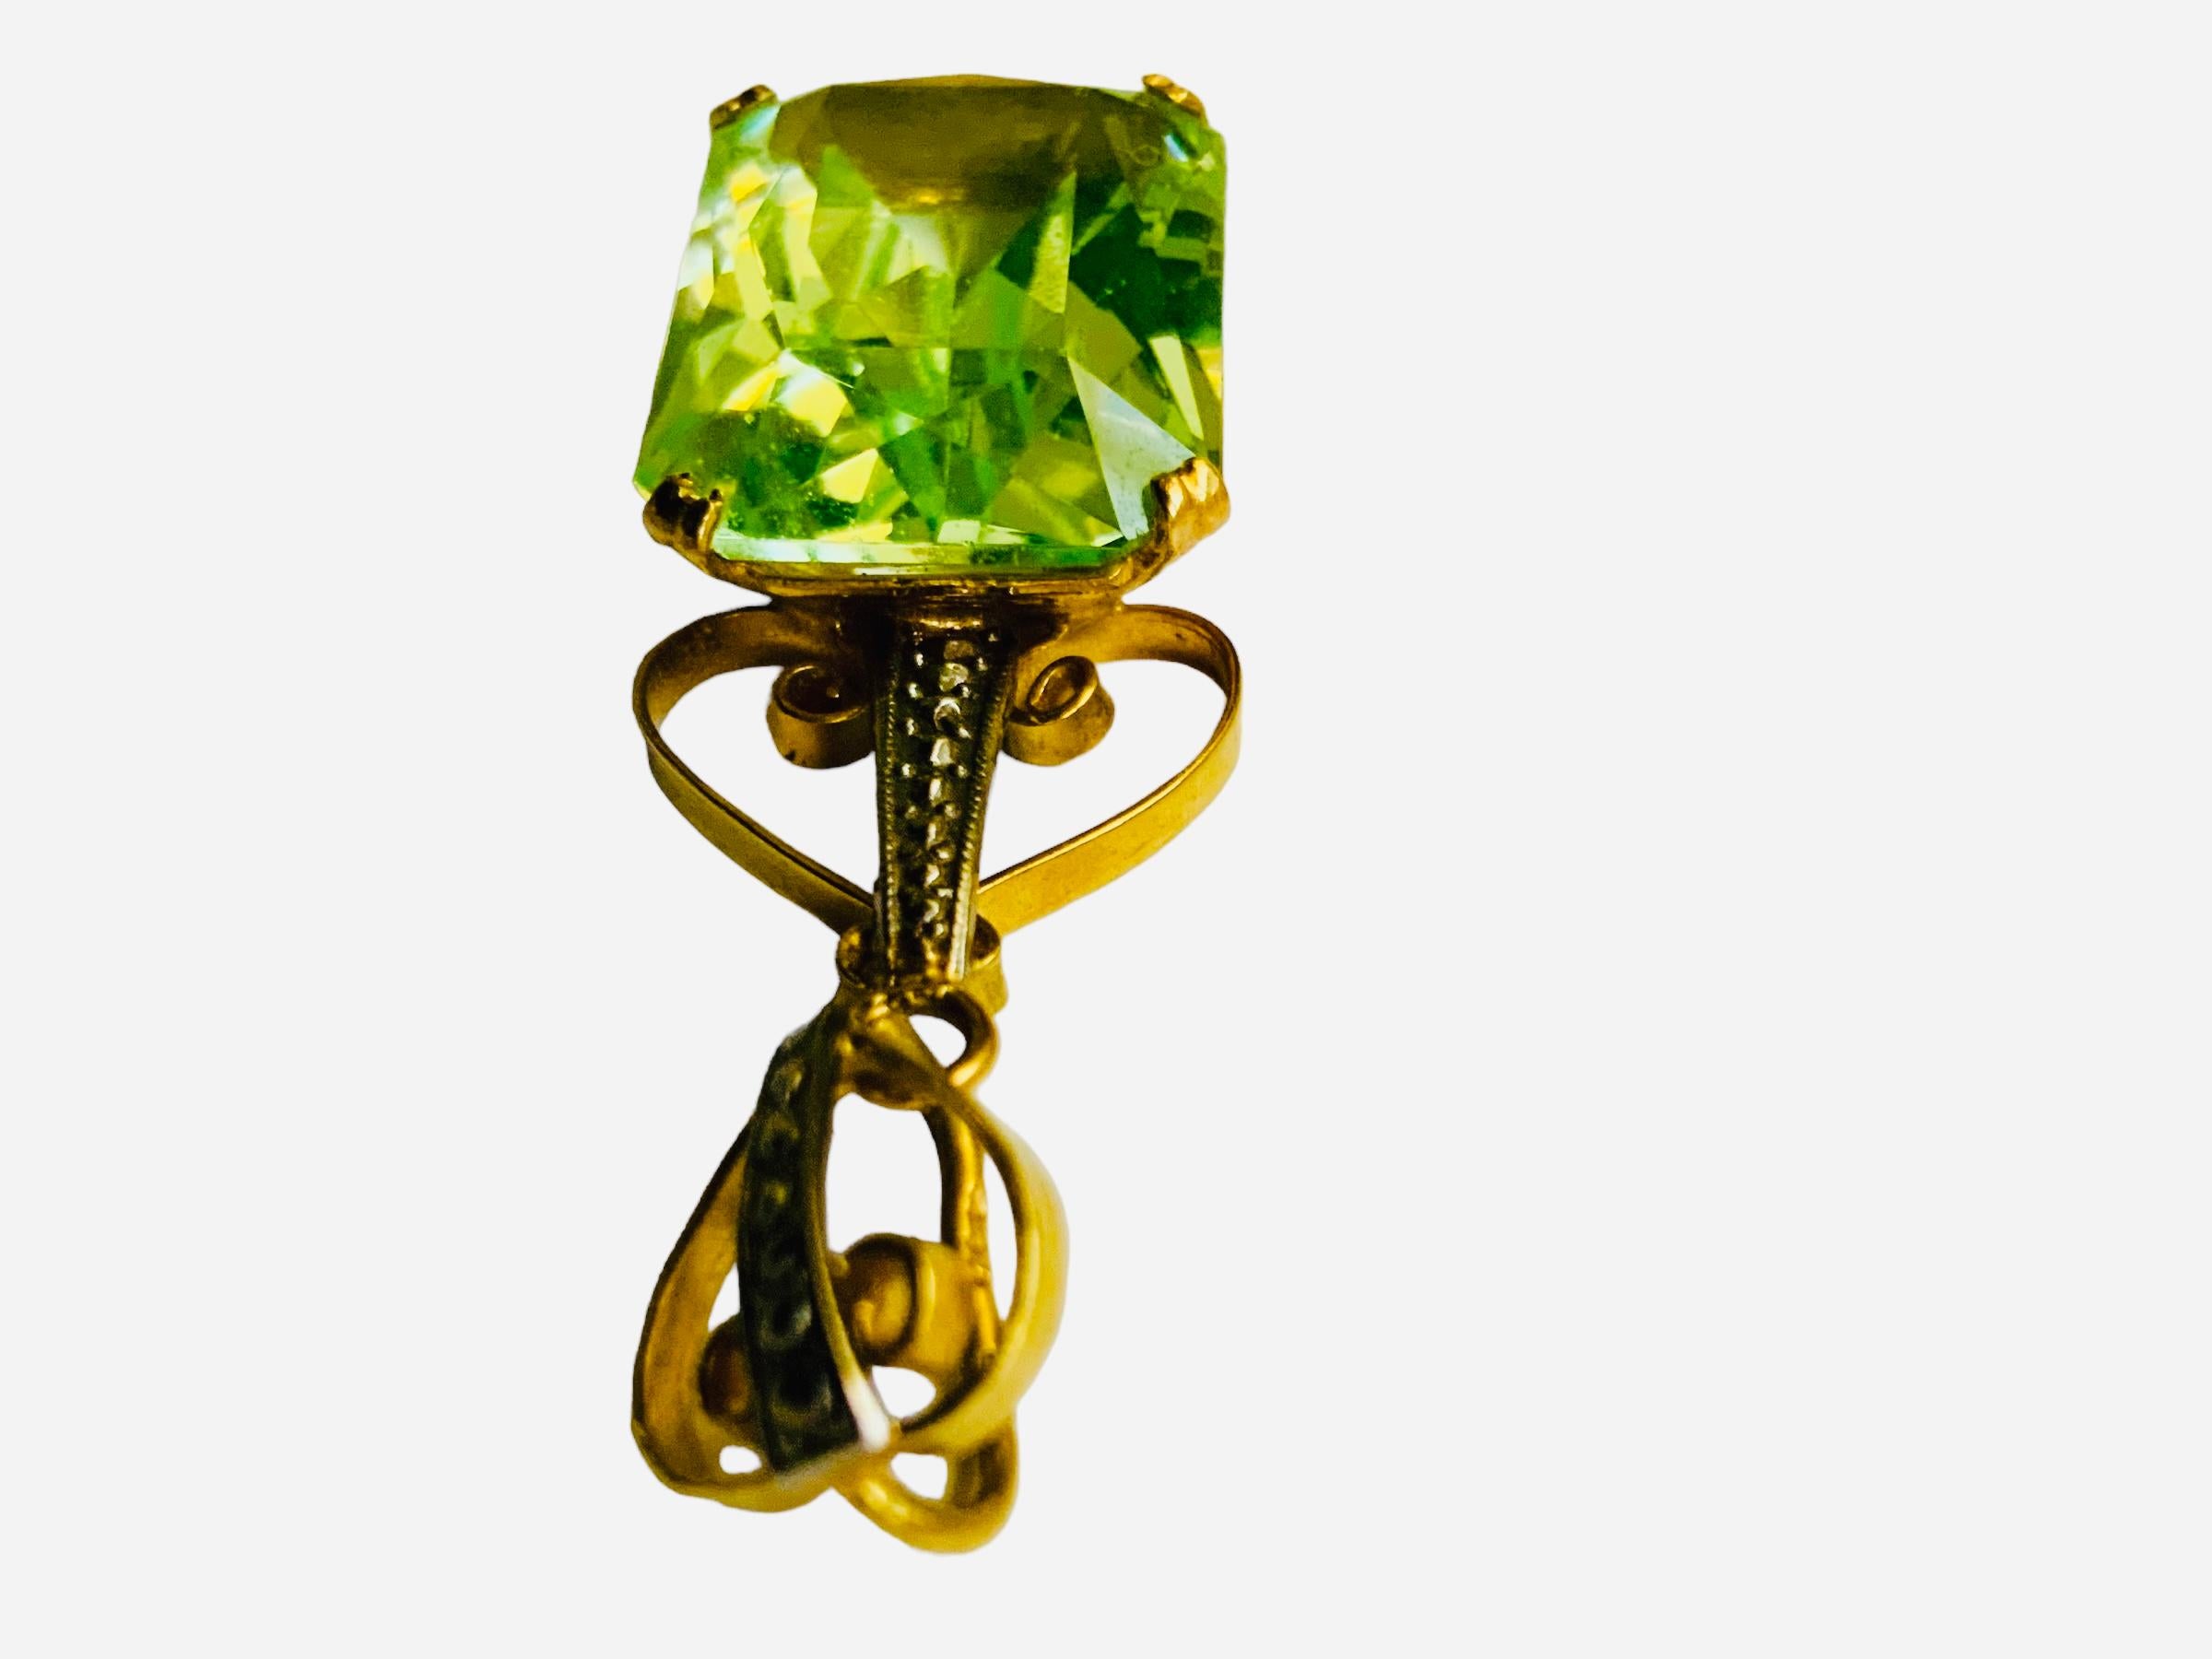 This is a Victorian style 18K yellow Gold Green Topaz Pendant. The Green topaz is emerald cut. It is mounted in a 18K gold rectangular base decorated in their sides with engraved squares with scrolls in their center. The pendant is adorned at the